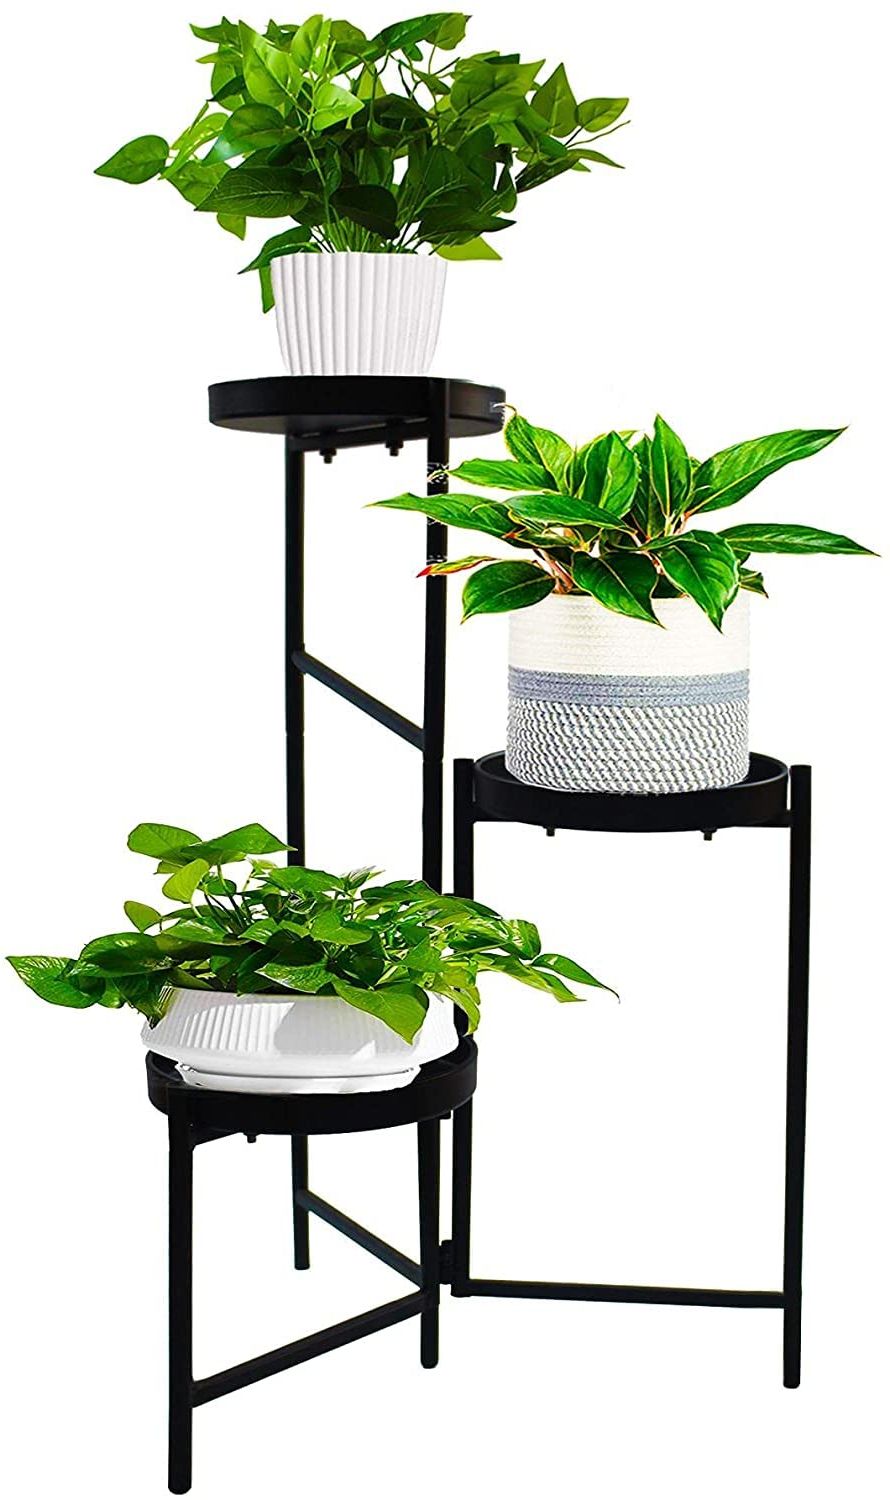 Iron Base Plant Stands For Well Known Metal Plant Stand Outdoor 3 Tier Flower Pot Holder Wrought Iron Plants Rack  Indoor Corner Stands Display Shelf Fold Vertical Planter Shelves Table For  Garden Patio Lawn Balcony Office Black Round (View 4 of 10)